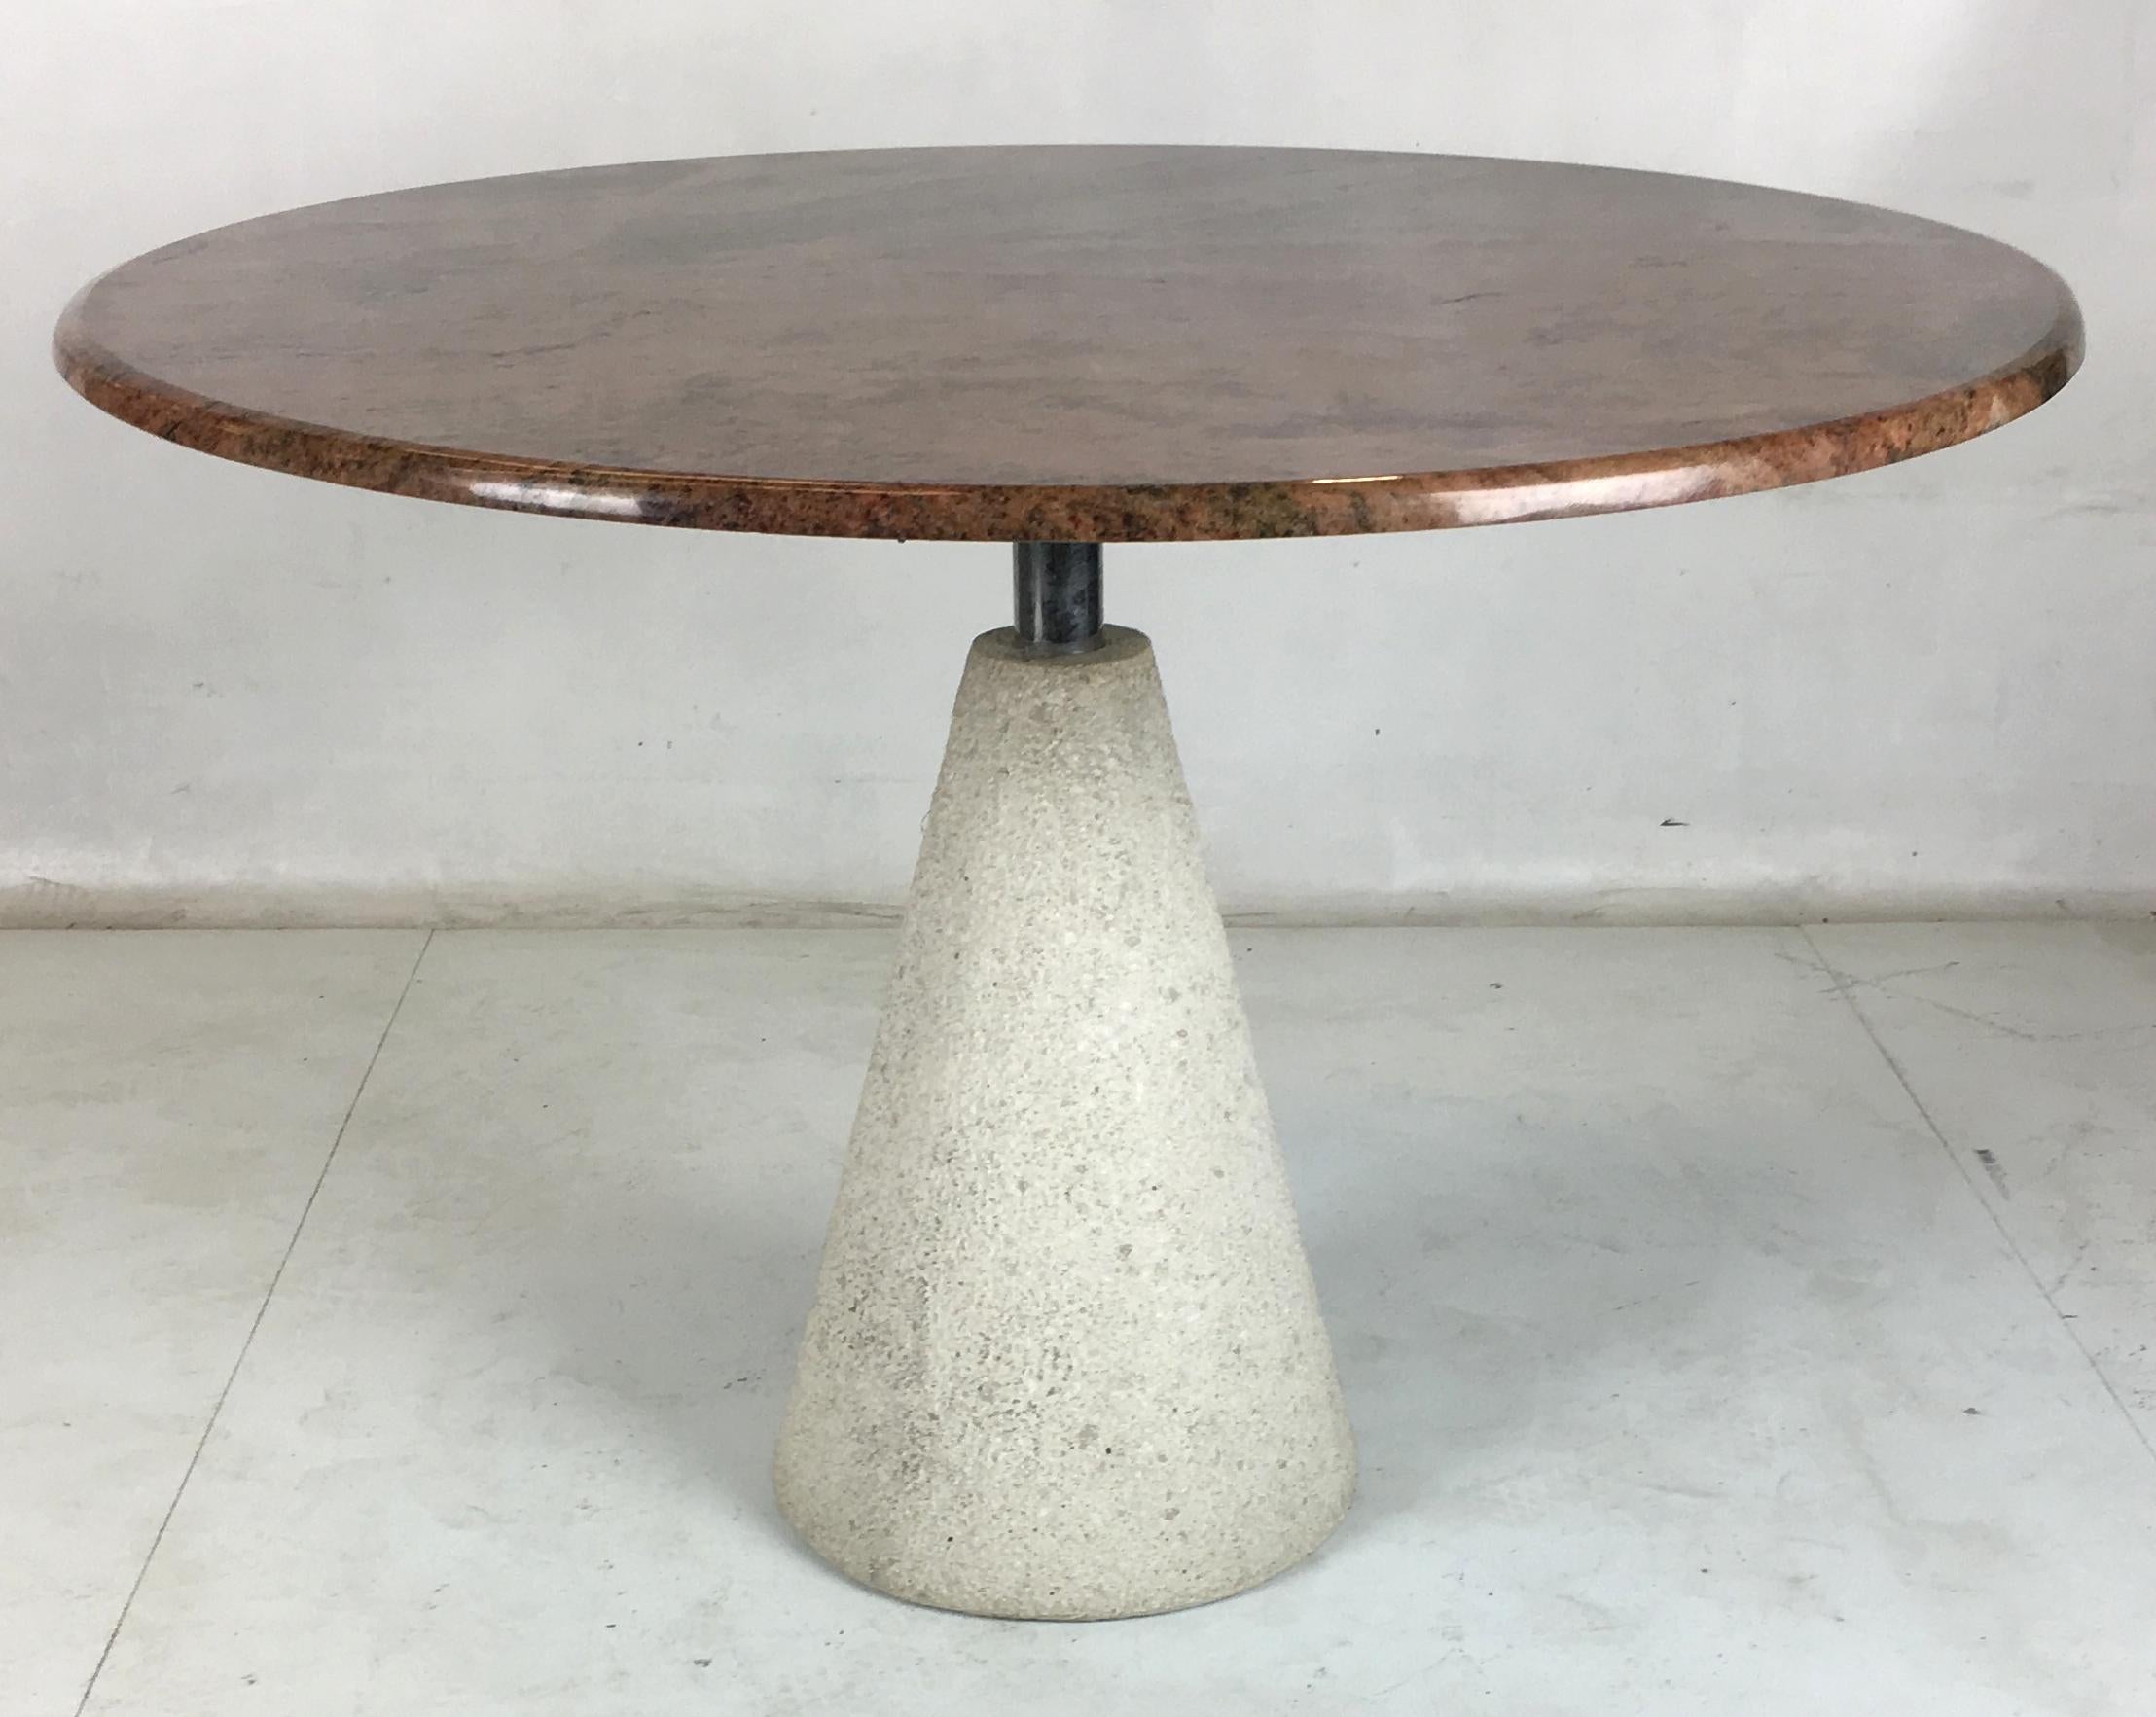 Modernist dining table consisting of a rough concrete inverted cone base with a polished stainless steel neck supporting a beautifully figured granite top. This table is a stunning modern statement piece.